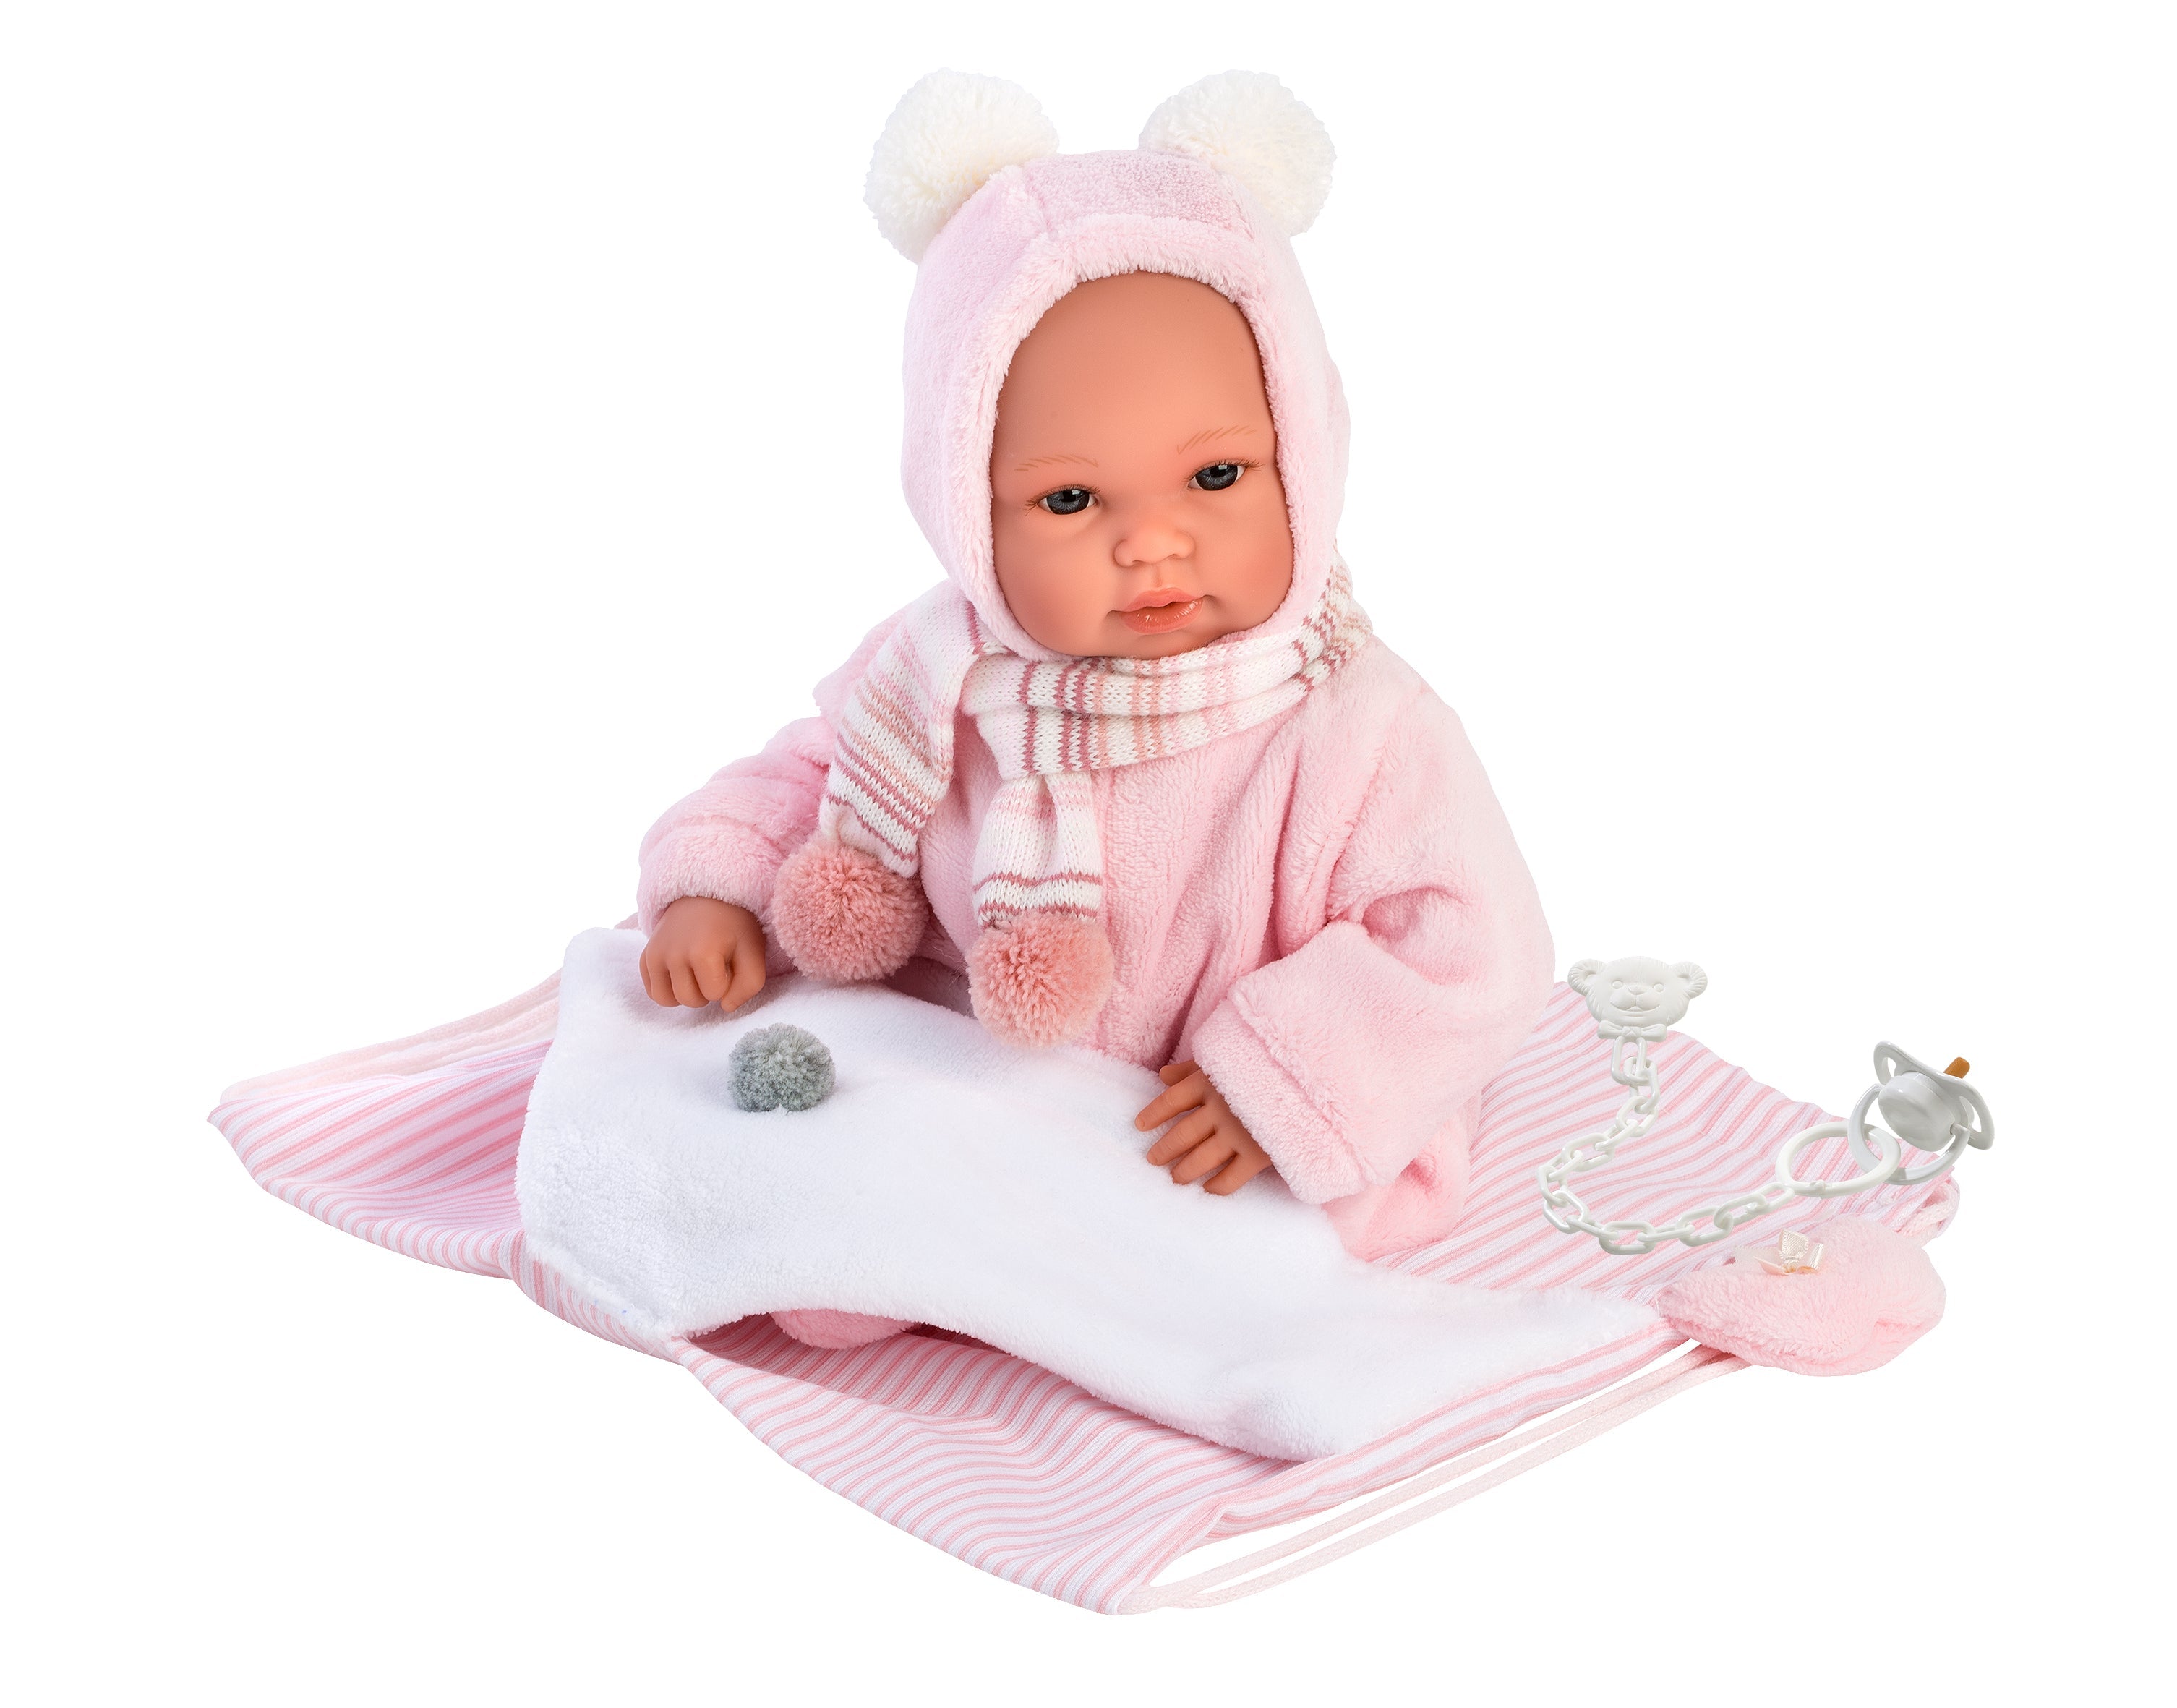 Llorens 14" Soft Body Crying Newborn Doll Amelia with Swaddle Blanket Backpack Dolls